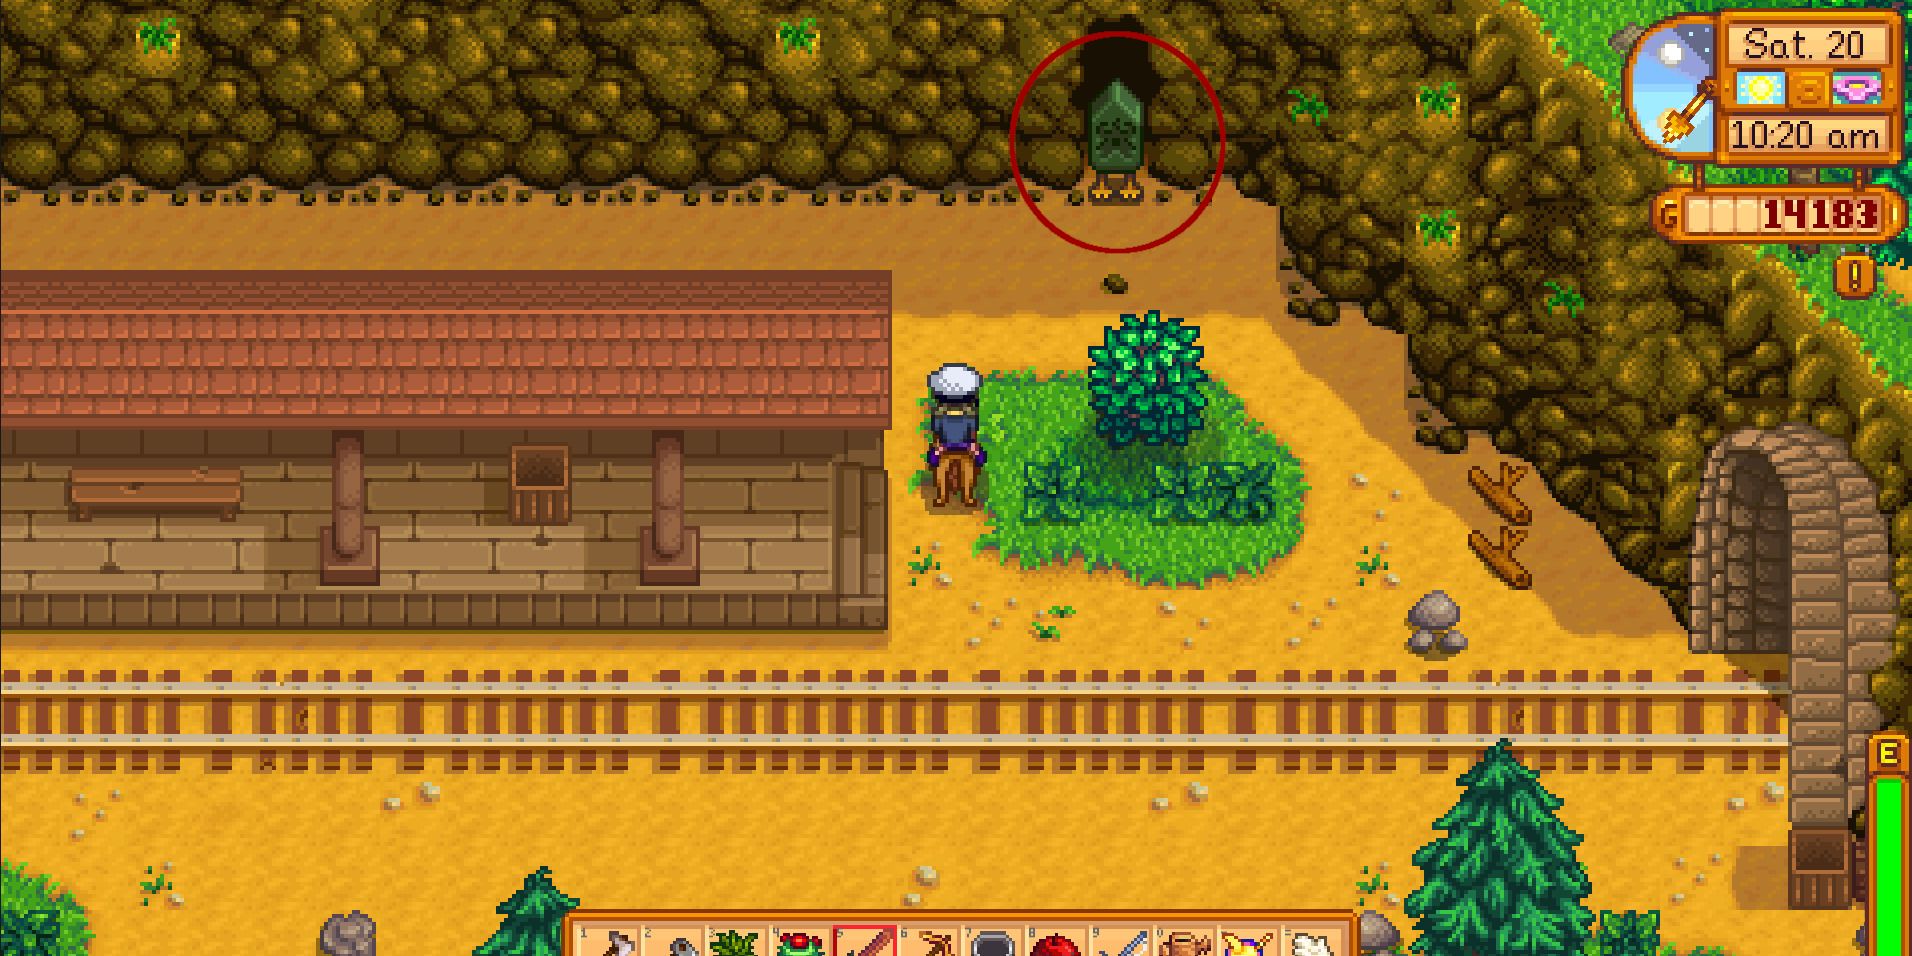 Image of the entrance to the Witch's Lair in Stardew Valley